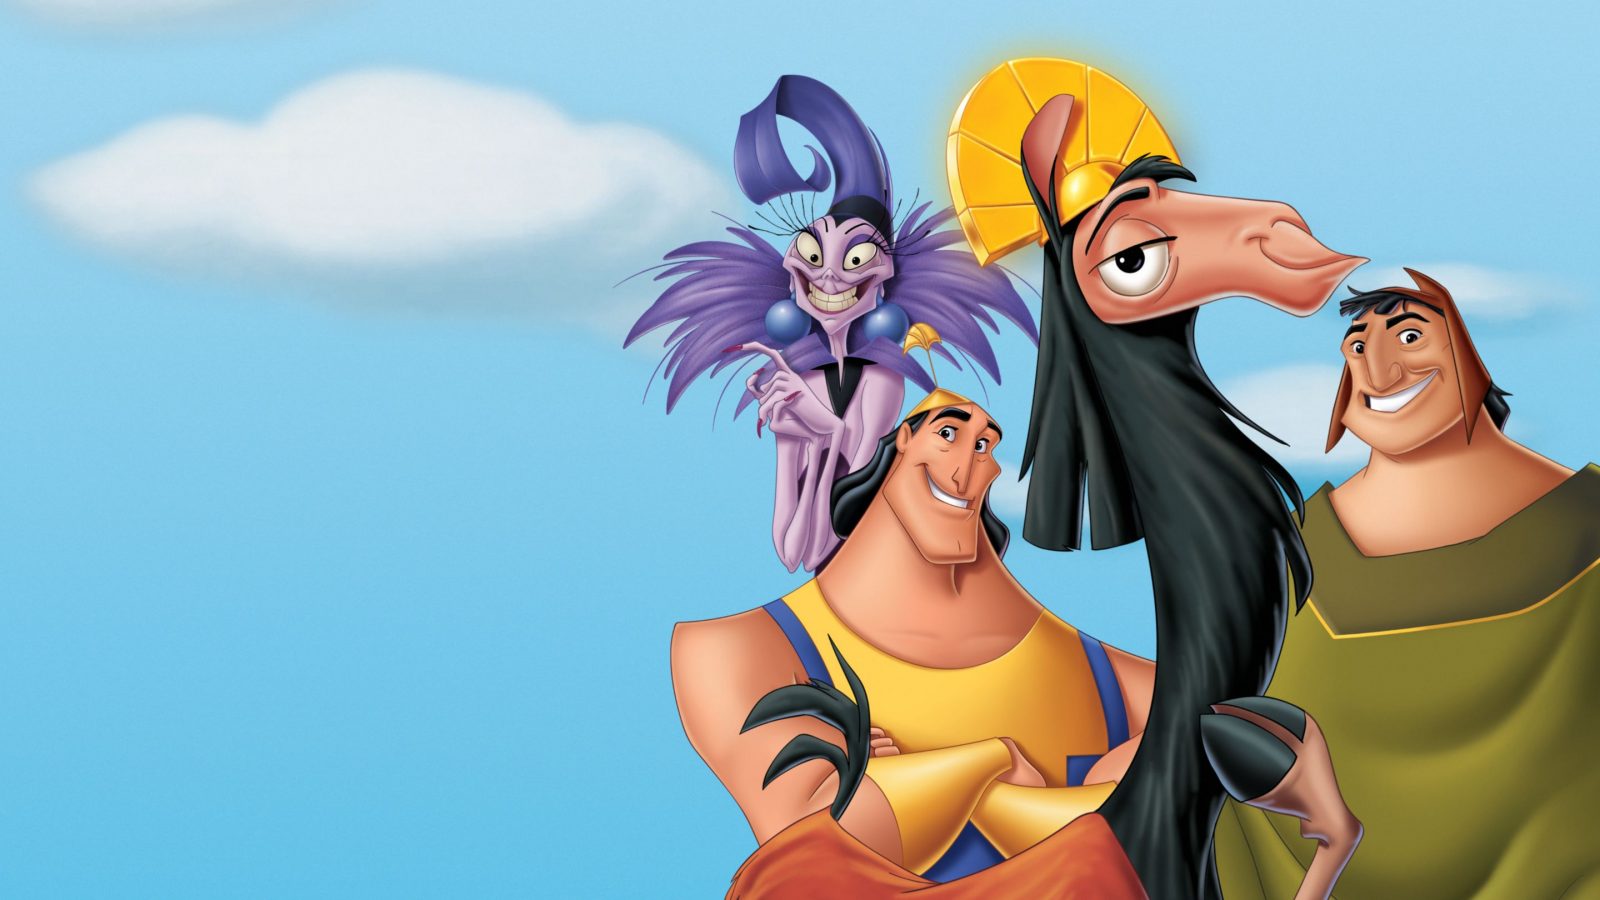 Only a Disney Scholar Can Get Over 75% On This Geography Quiz The Emperor's New Groove